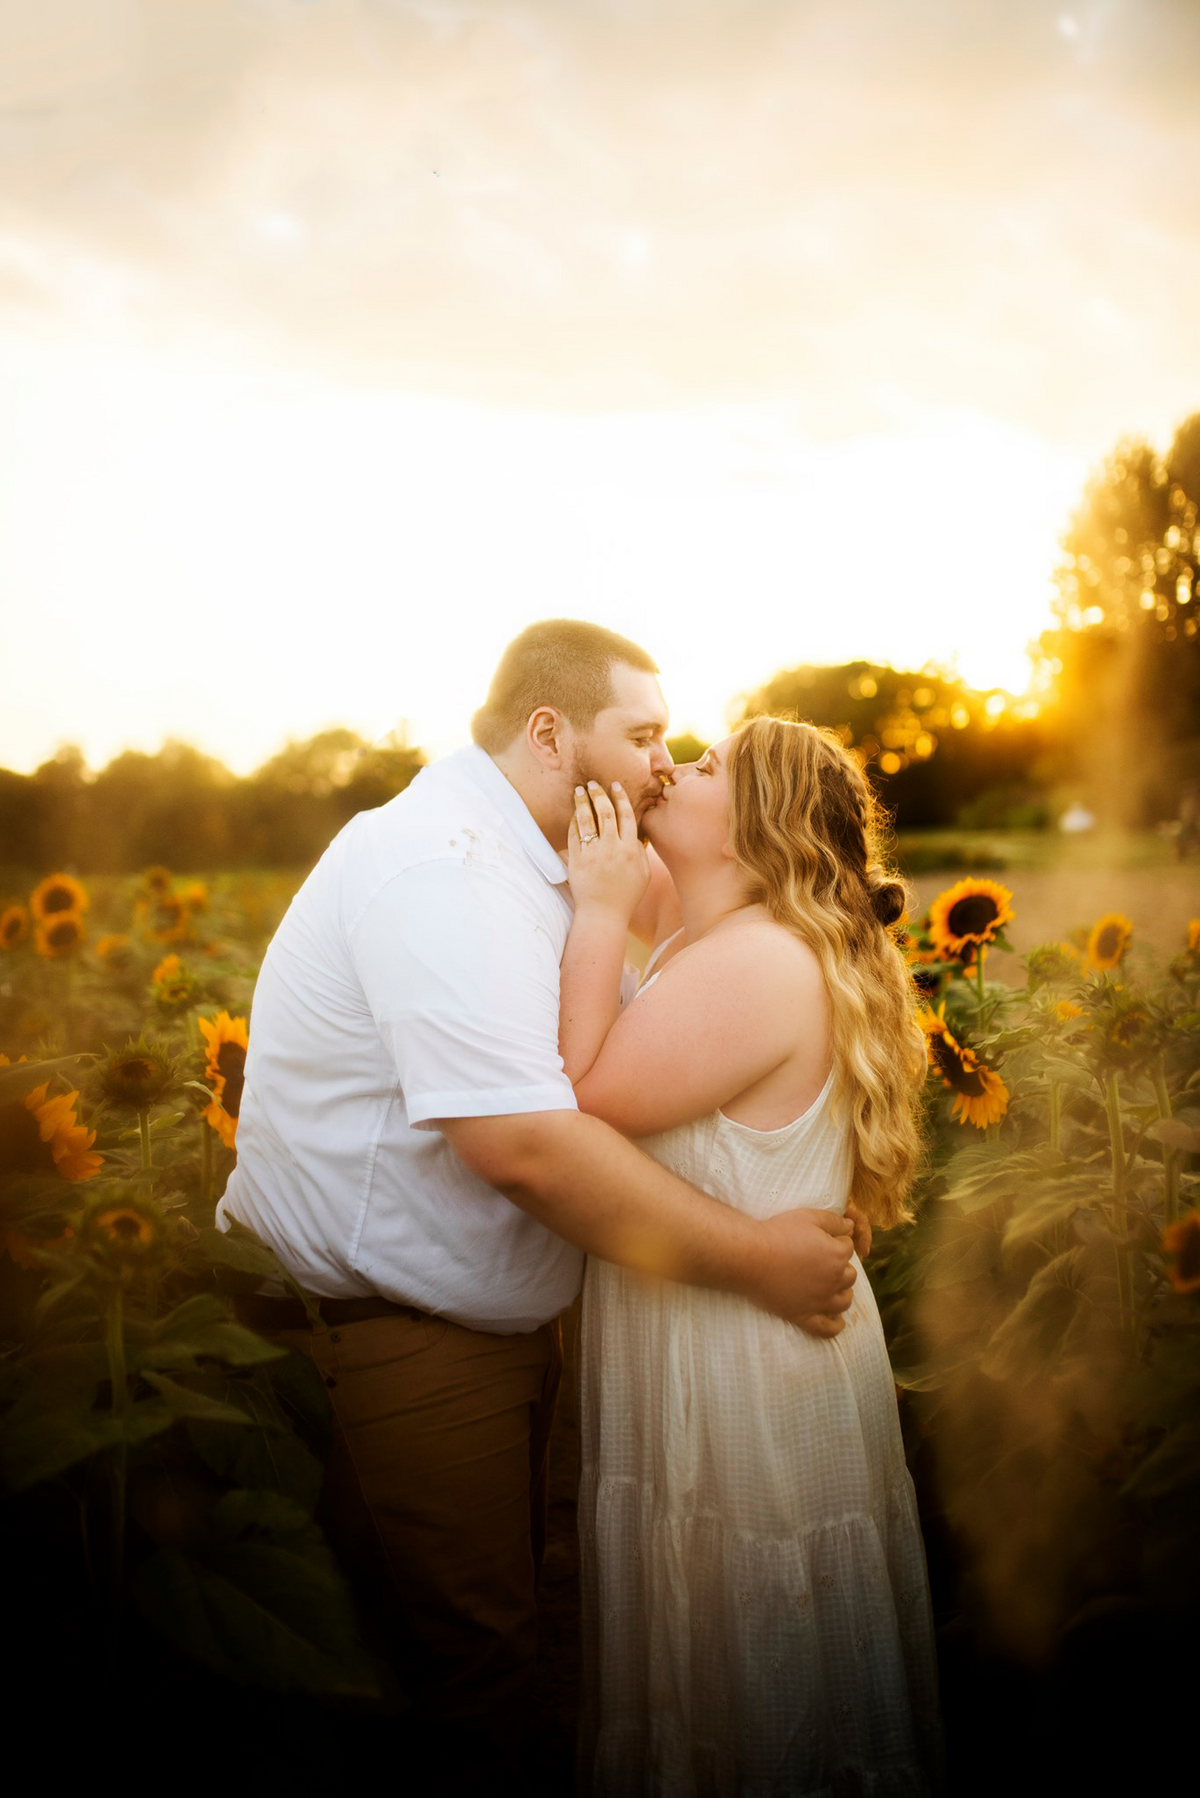 magical-Engagement-photography-springfield-mo